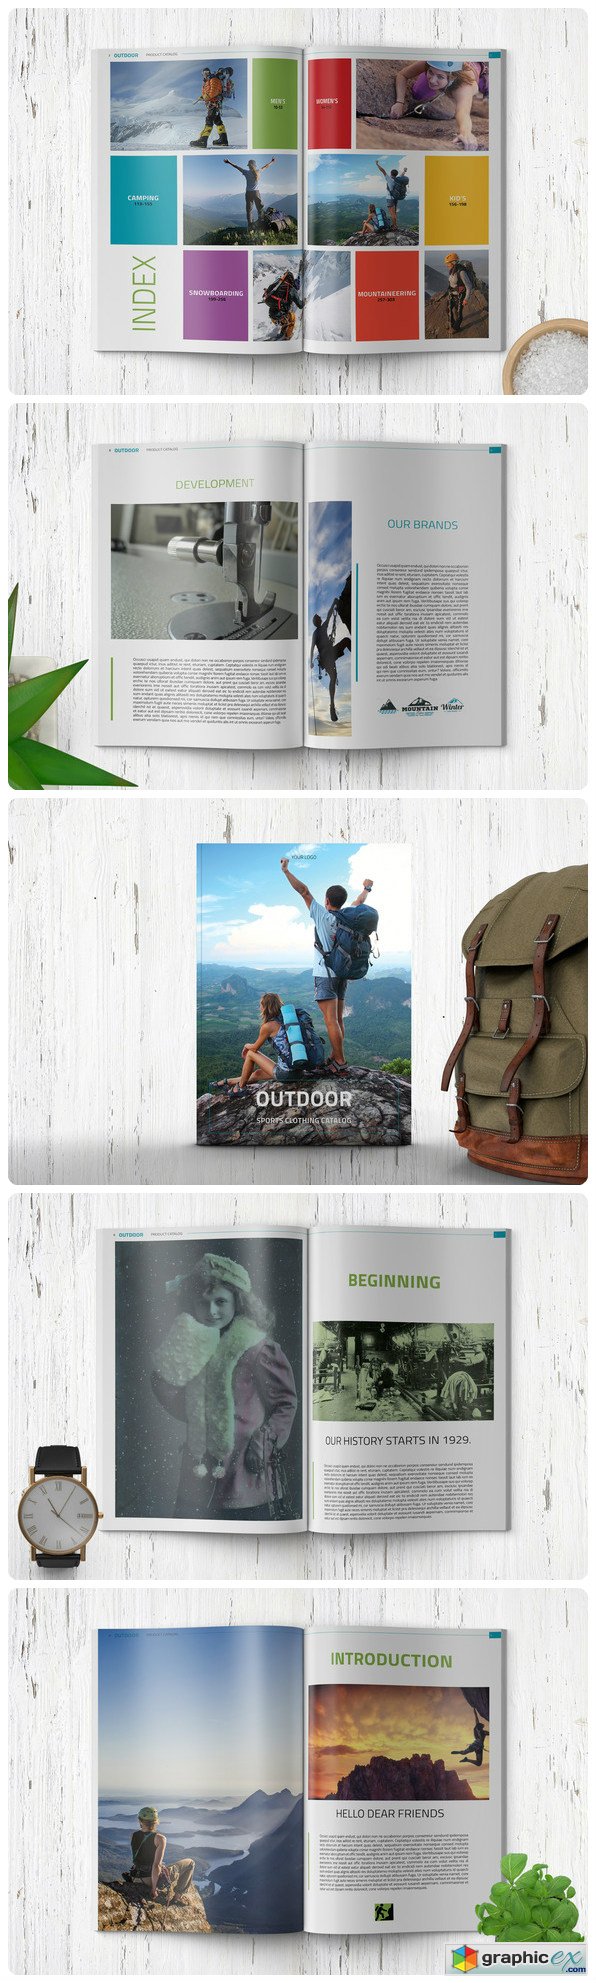 Outdoor - Clothing Product Catalogue